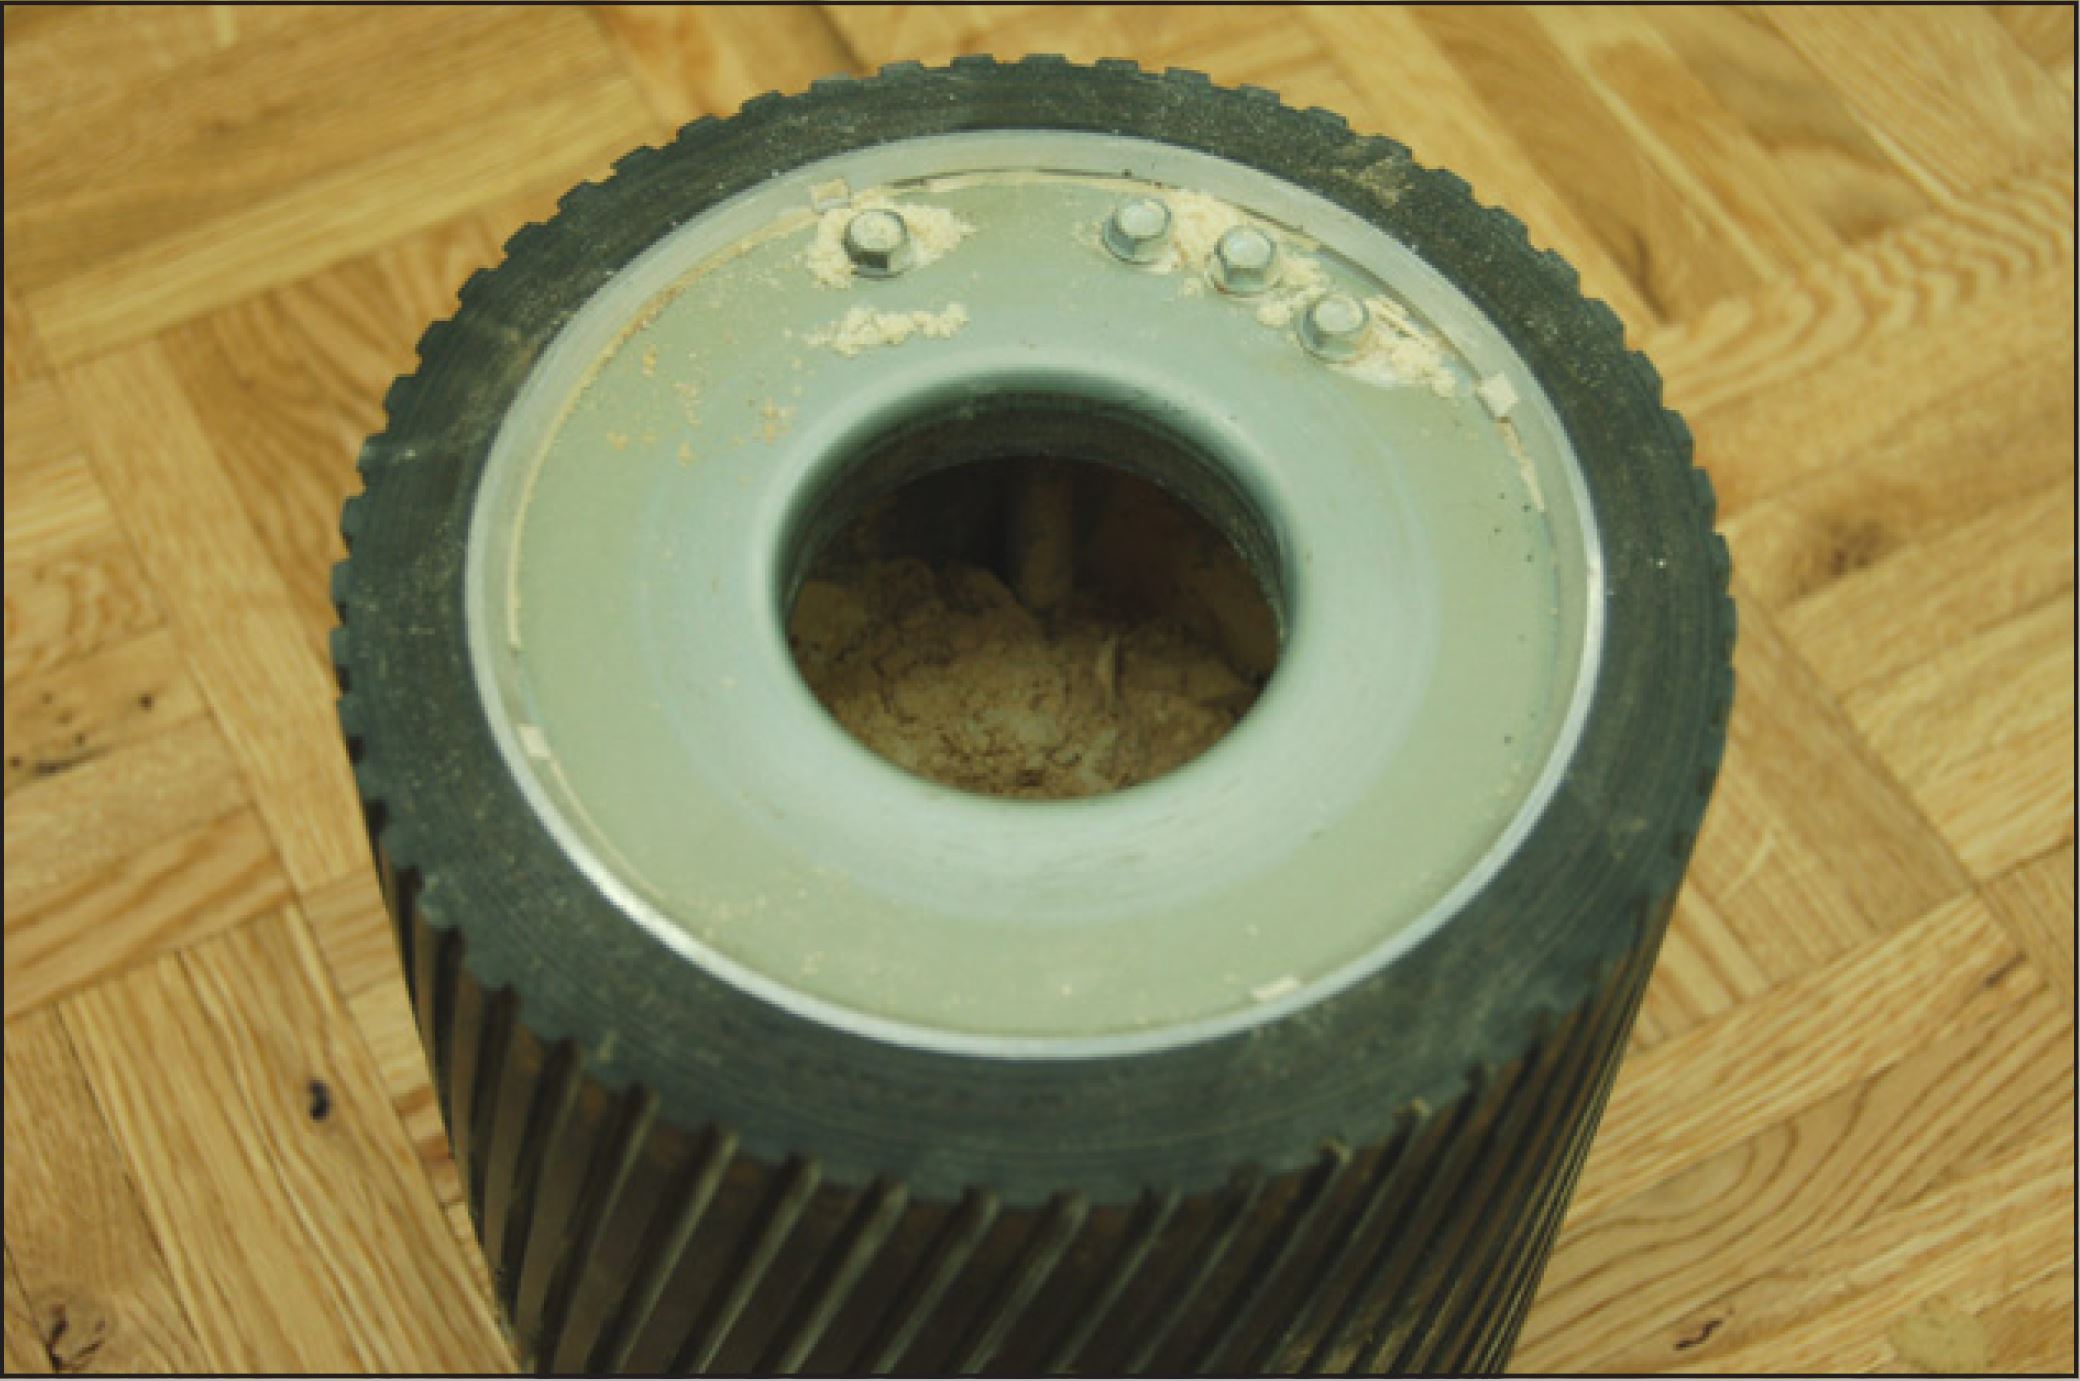 Sanding Drum Clogged with Dust and Debris Causes Poor Performance